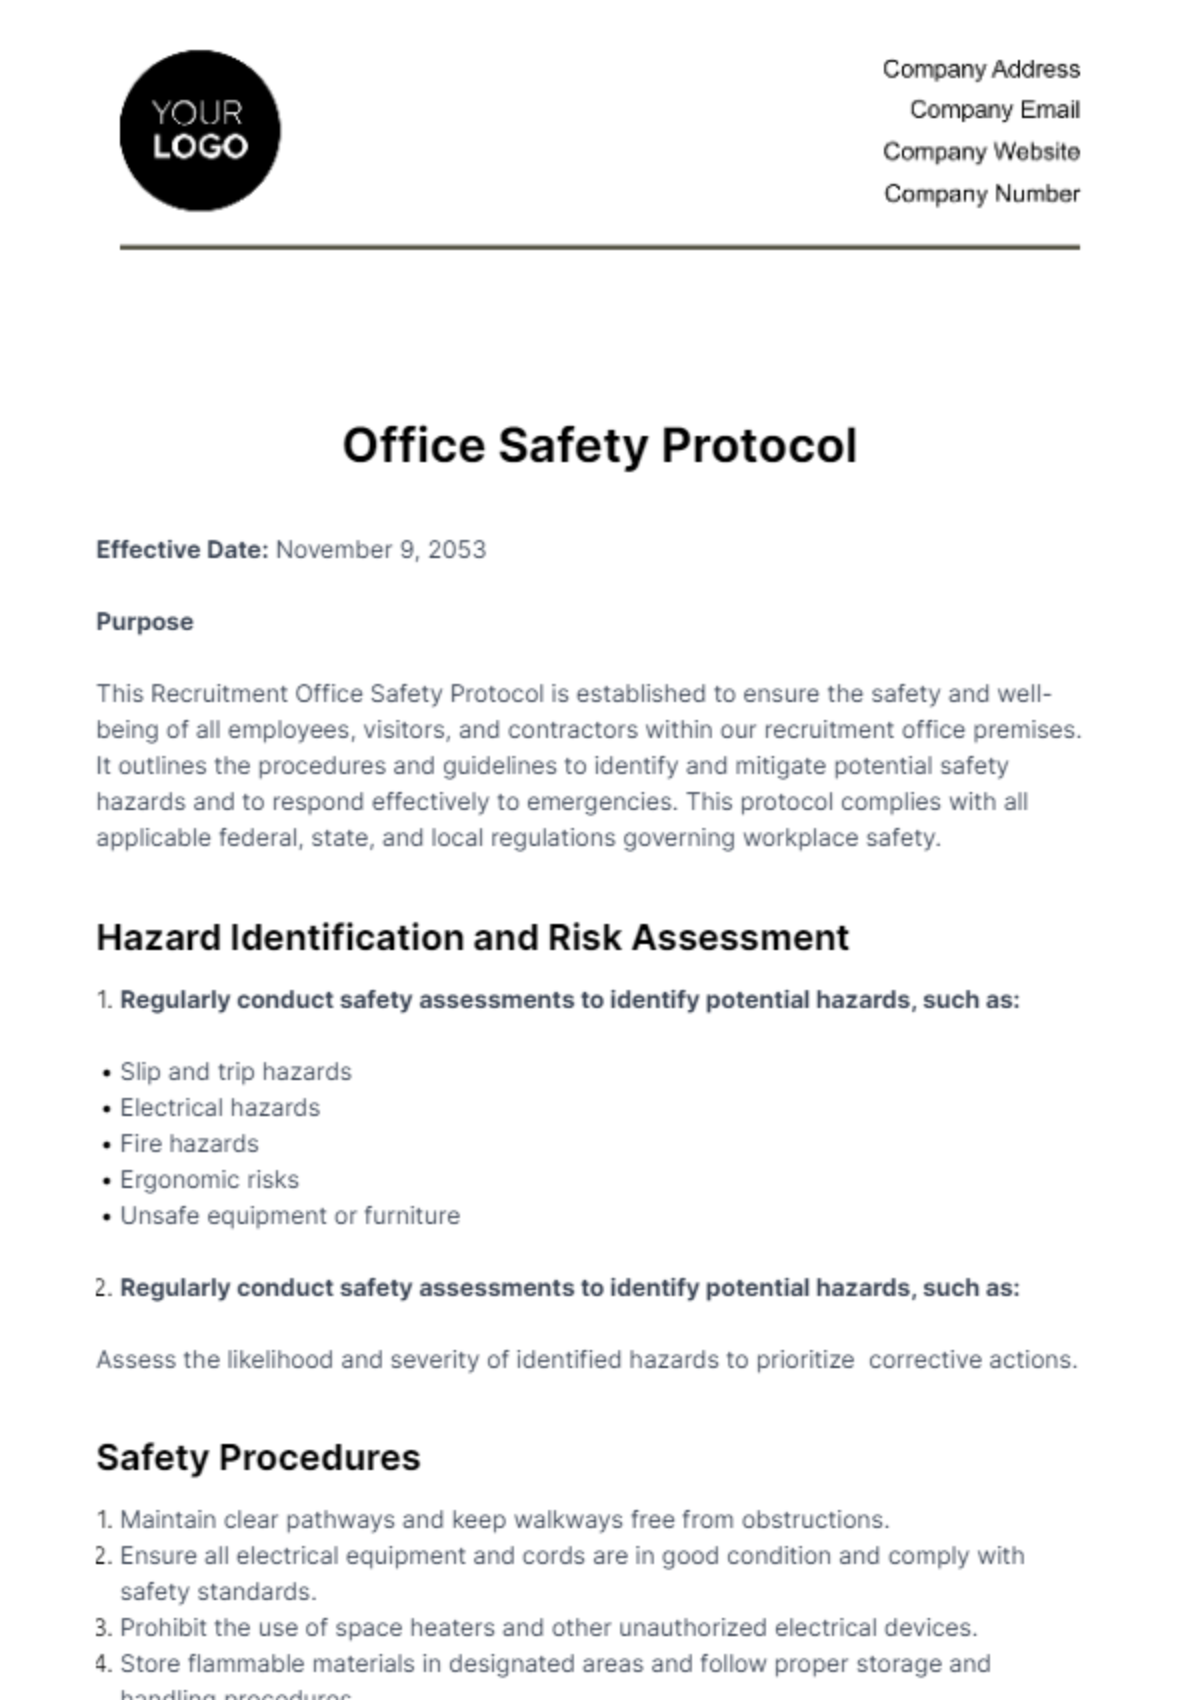 Office Safety Protocol HR Template